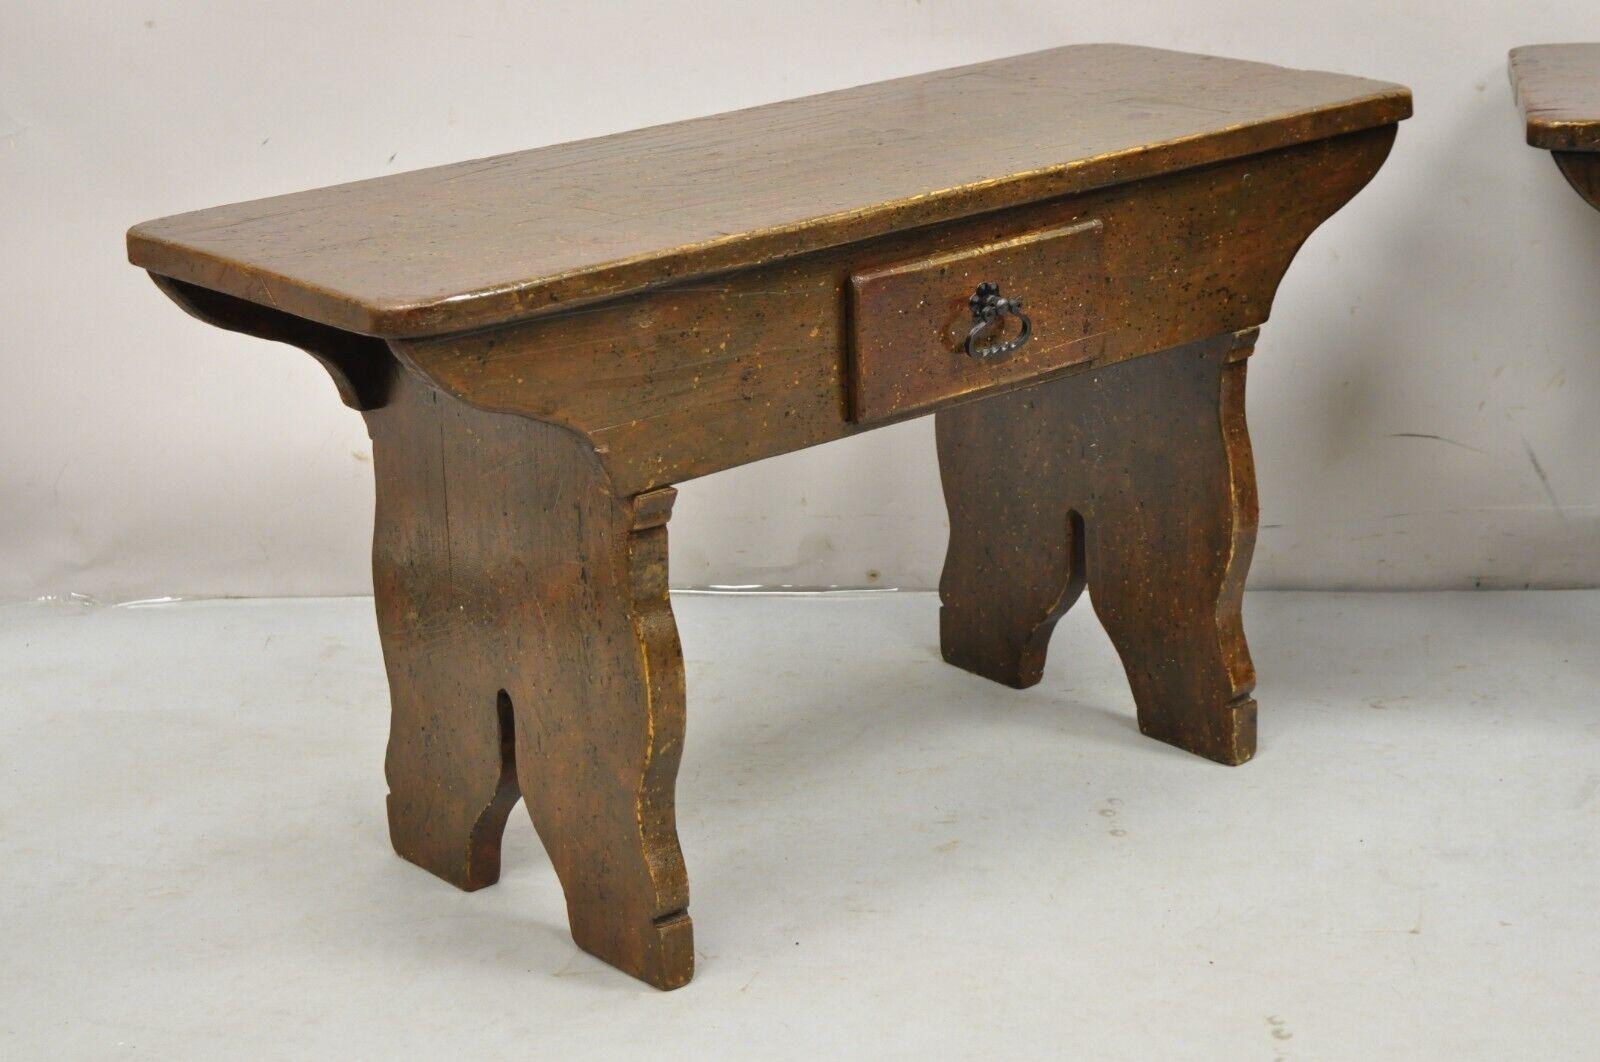 Antique French Country Farmhouse Pine Wood Low Side Table Bench w/ Drawer - Pair For Sale 8